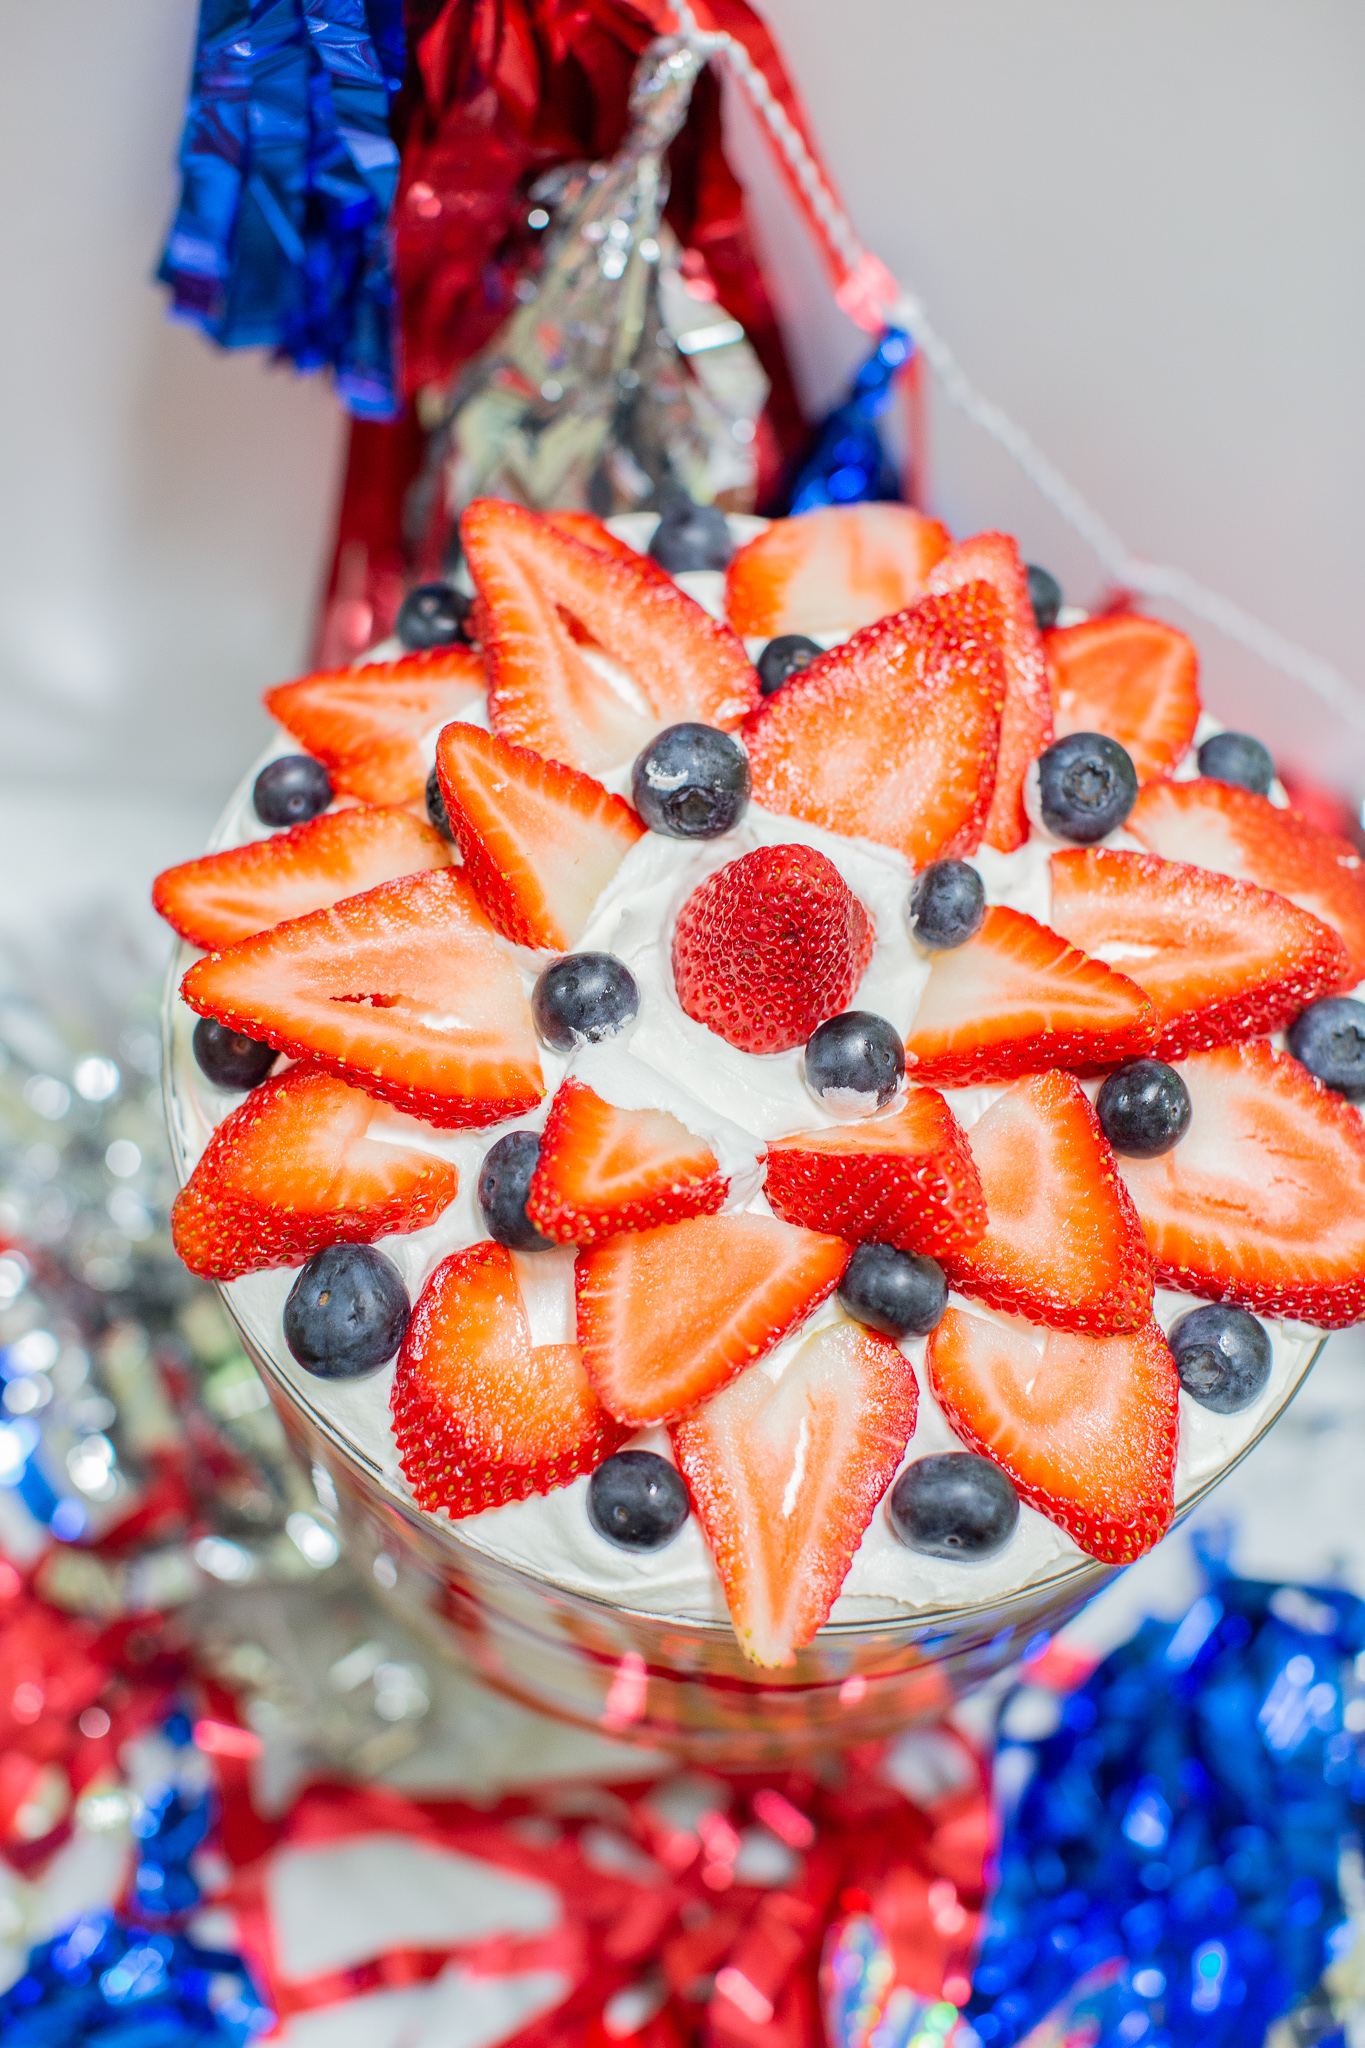 Three Berry Vanilla Pudding Trifle Recipe (the Perfect Summertime Dessert) by popular lifestyle blog, Coffee Beans and Bobby Pins: image of a three berry vanilla pudding trifle in a trifle dish with a red and blue tassel banner hanging in the background.